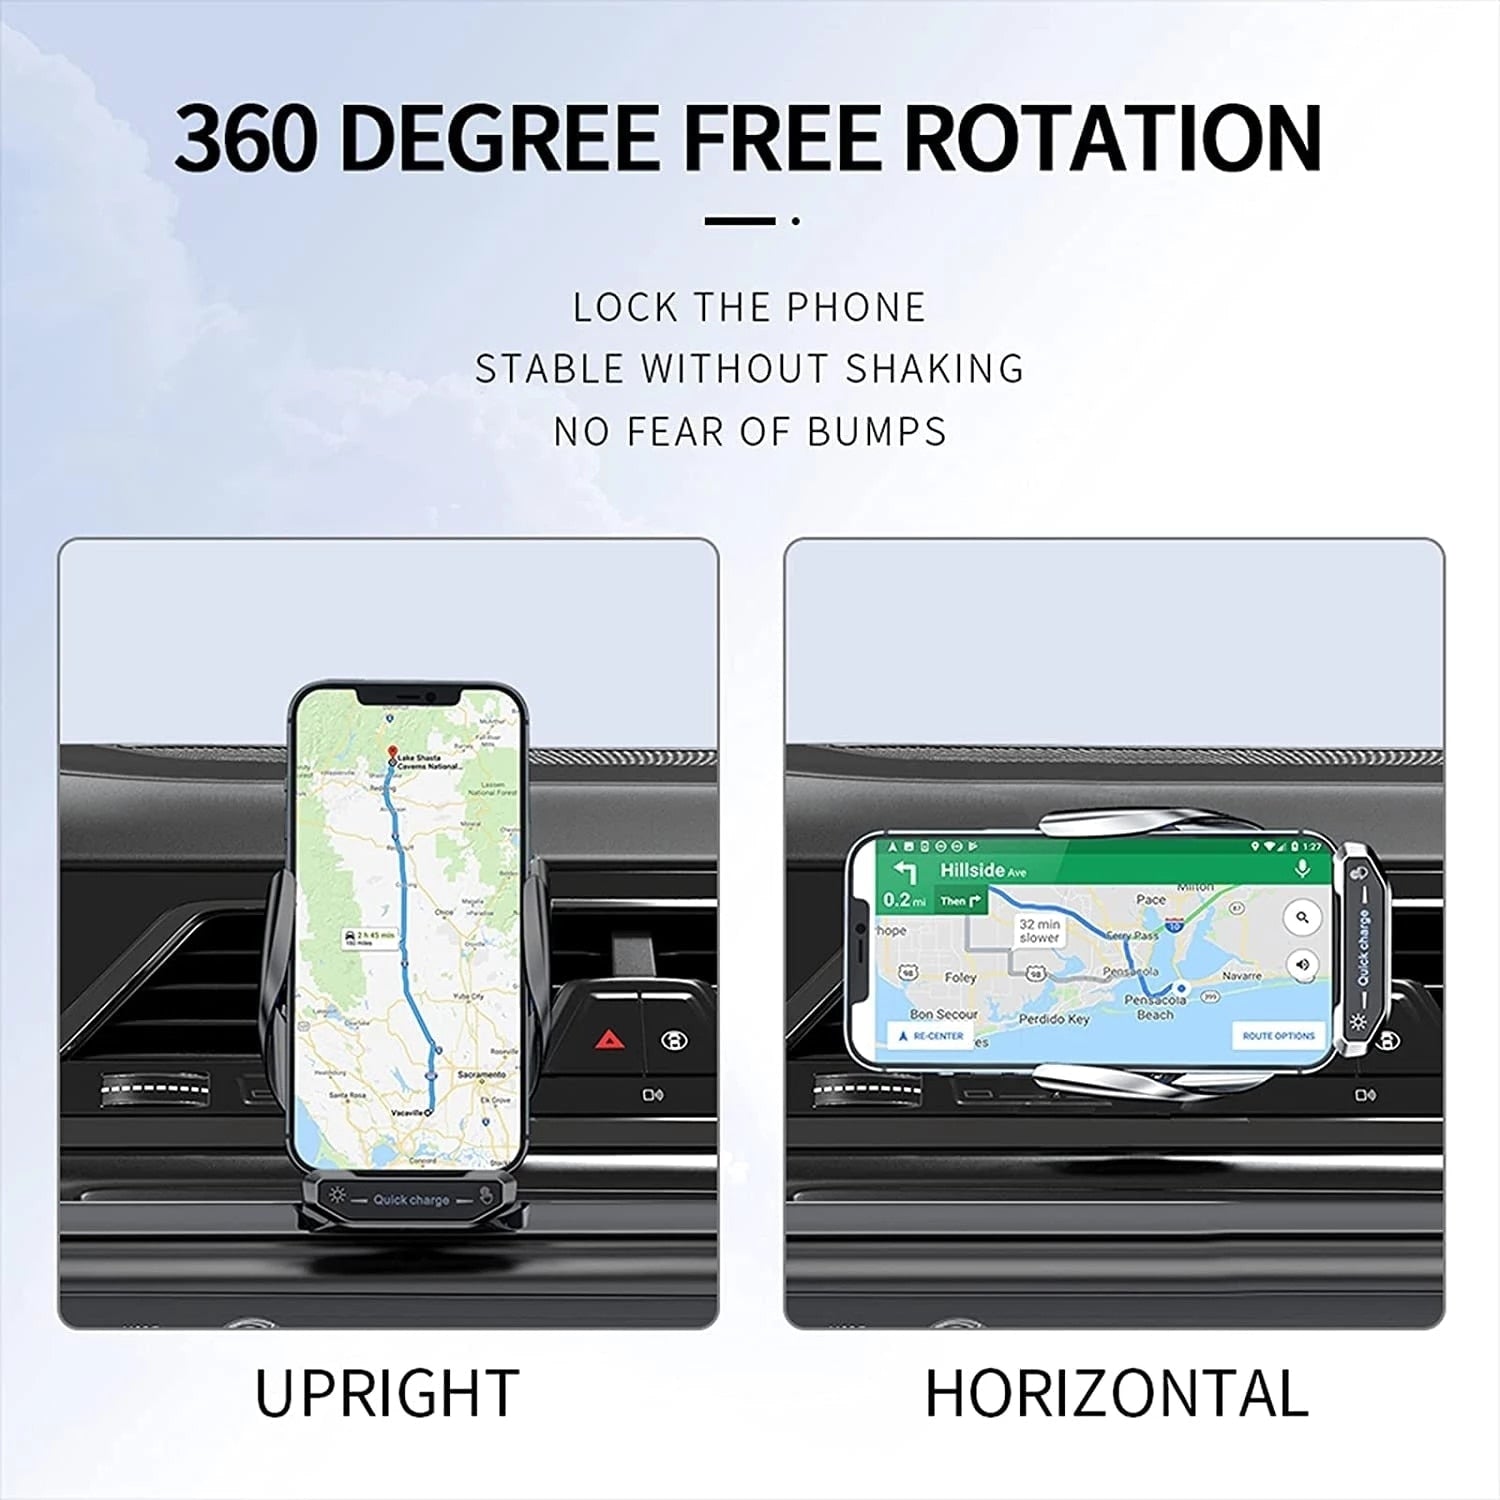 Wireless Charger Car Phone Holder Stand 15W Fast Charging Station For iPhone Xiaomi Samsung Huawei Magnetic Wireless Car Charger